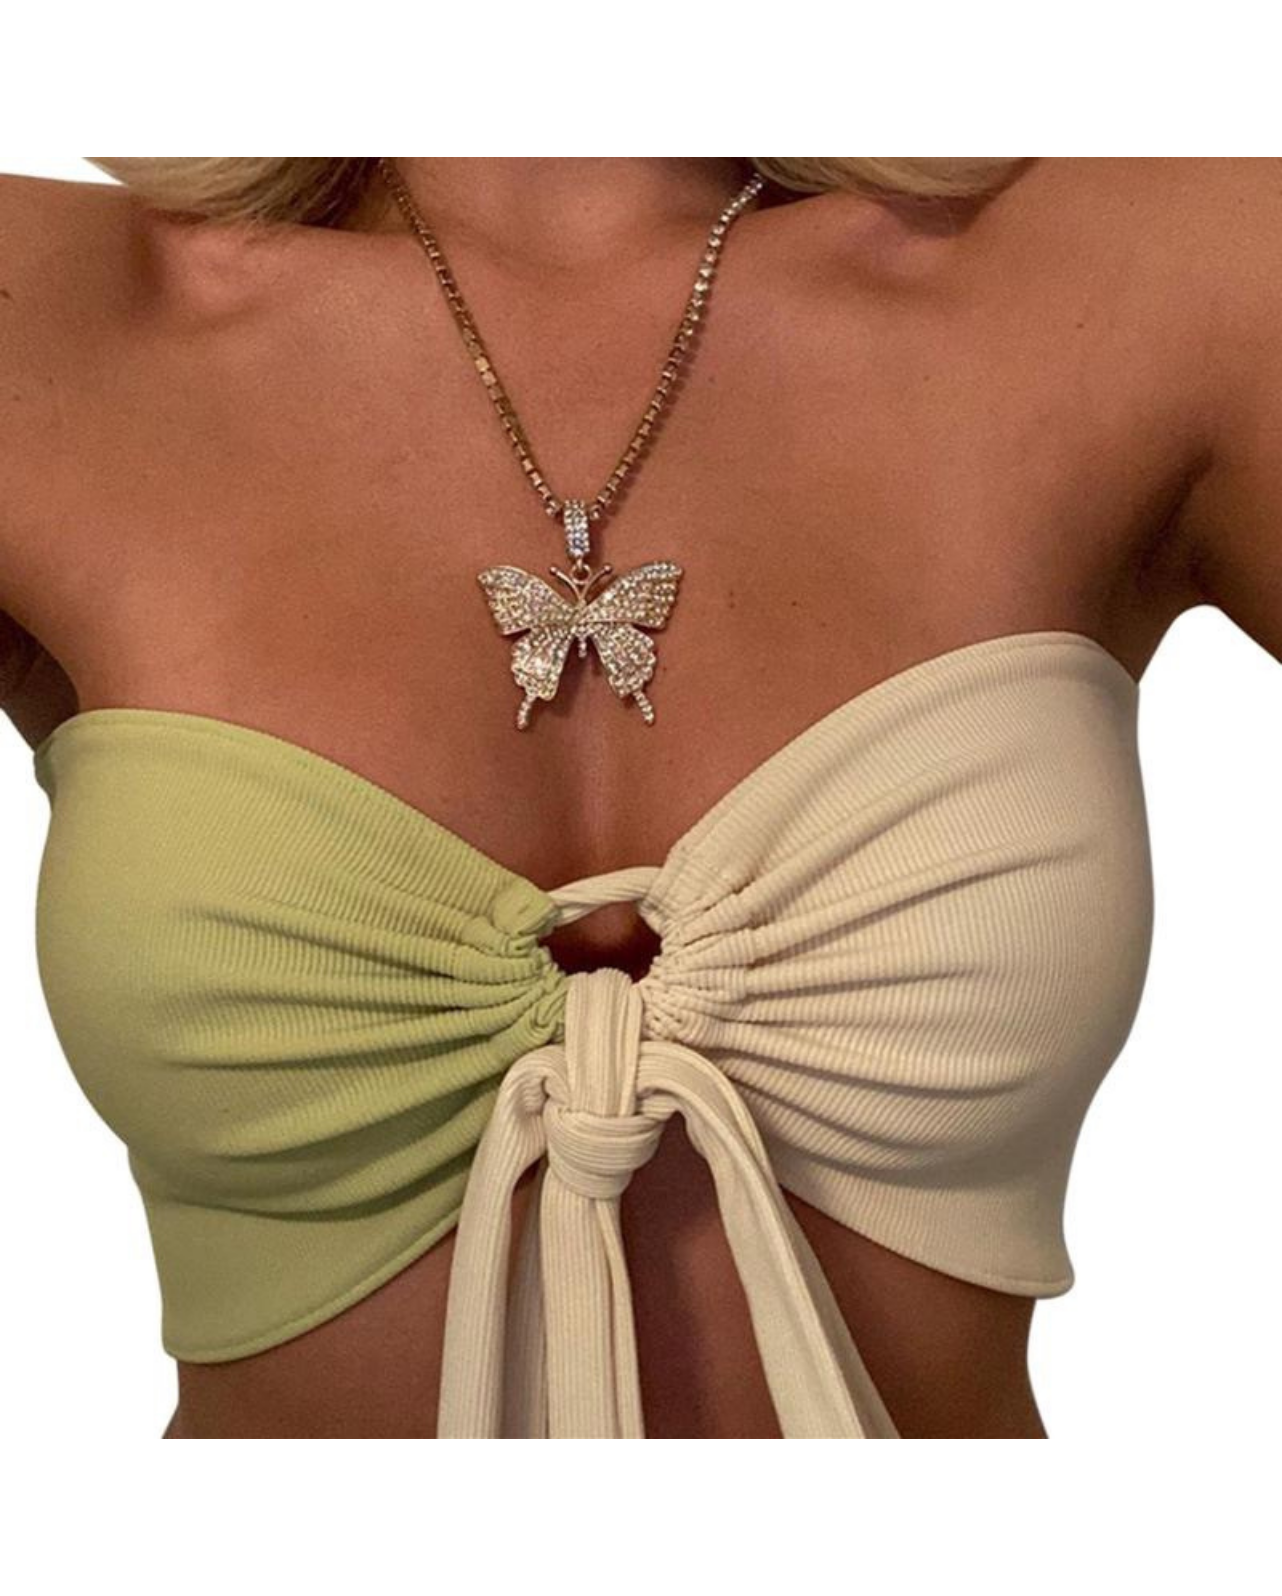 IMANI CUT OUT HALTER CROP TOP GREEN/WHITE (SAMPLE SALE)